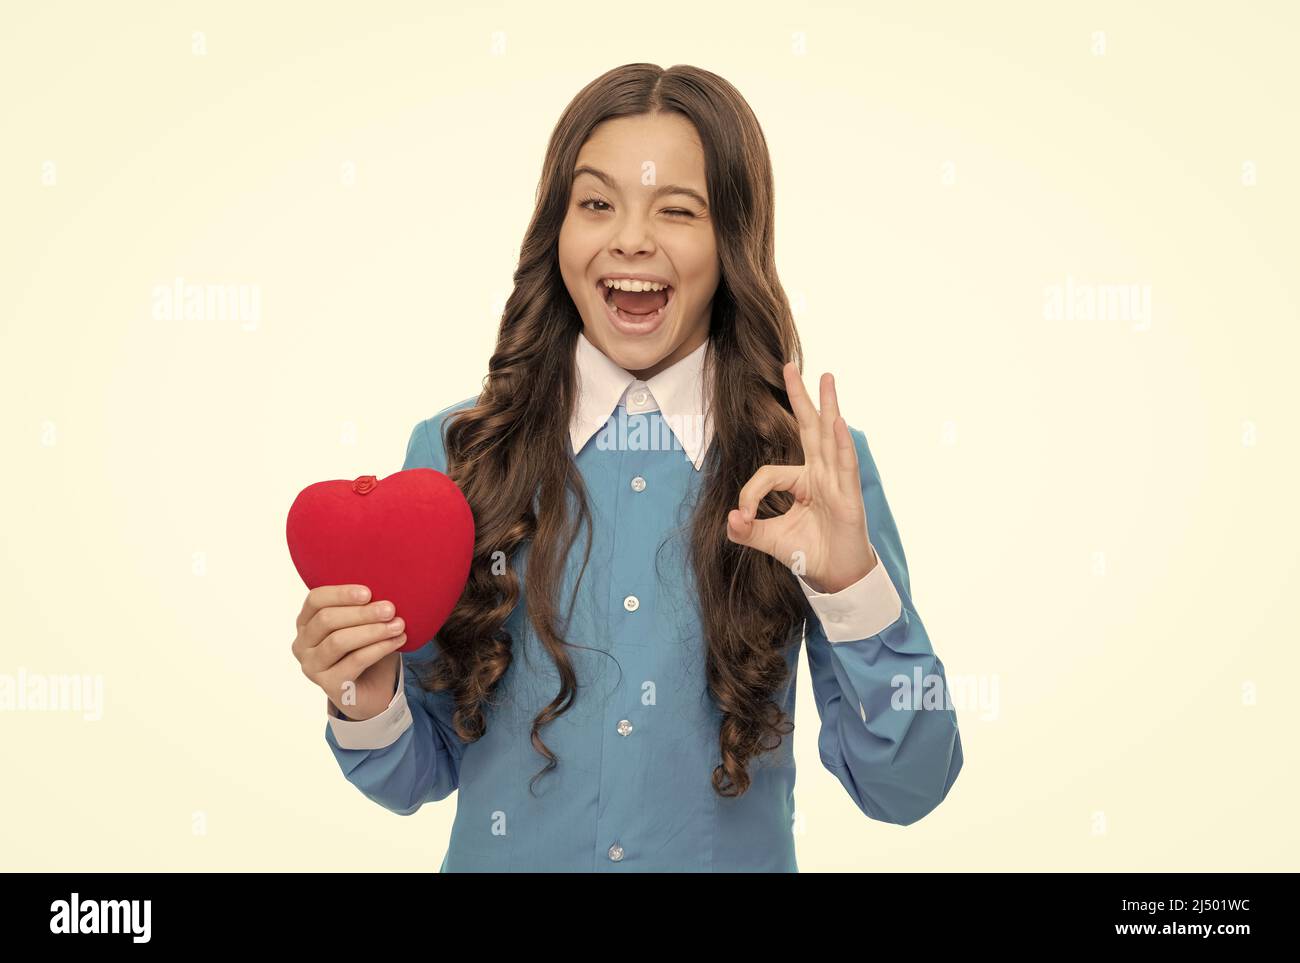 Playful girl hold red valentines heart showing OK hand gesture isolated on white, approval. Stock Photo